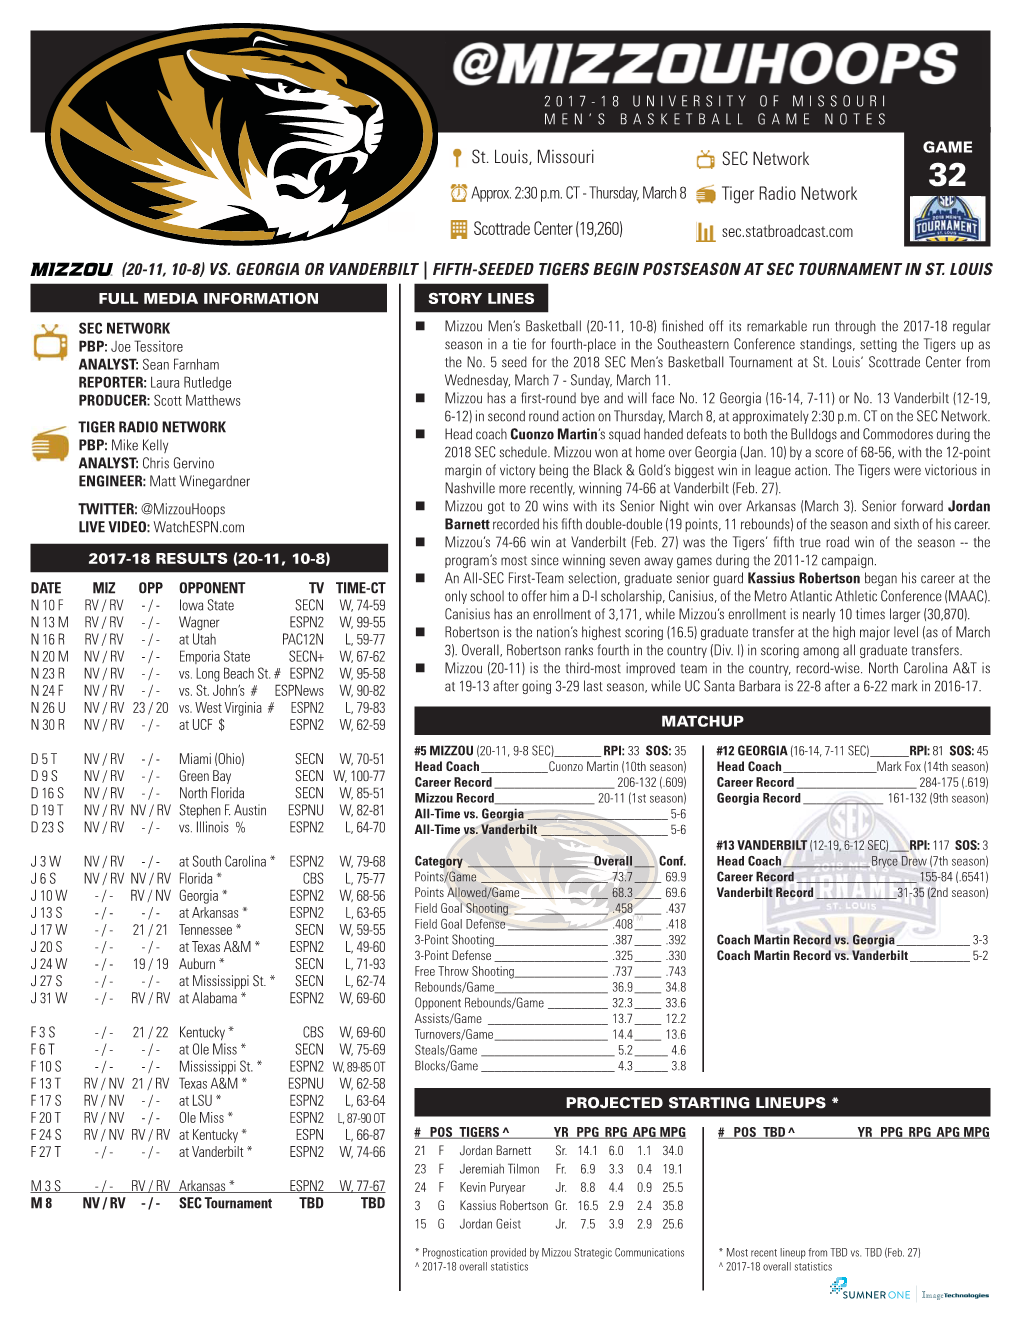 GAME NOTES NEWEST.Indd